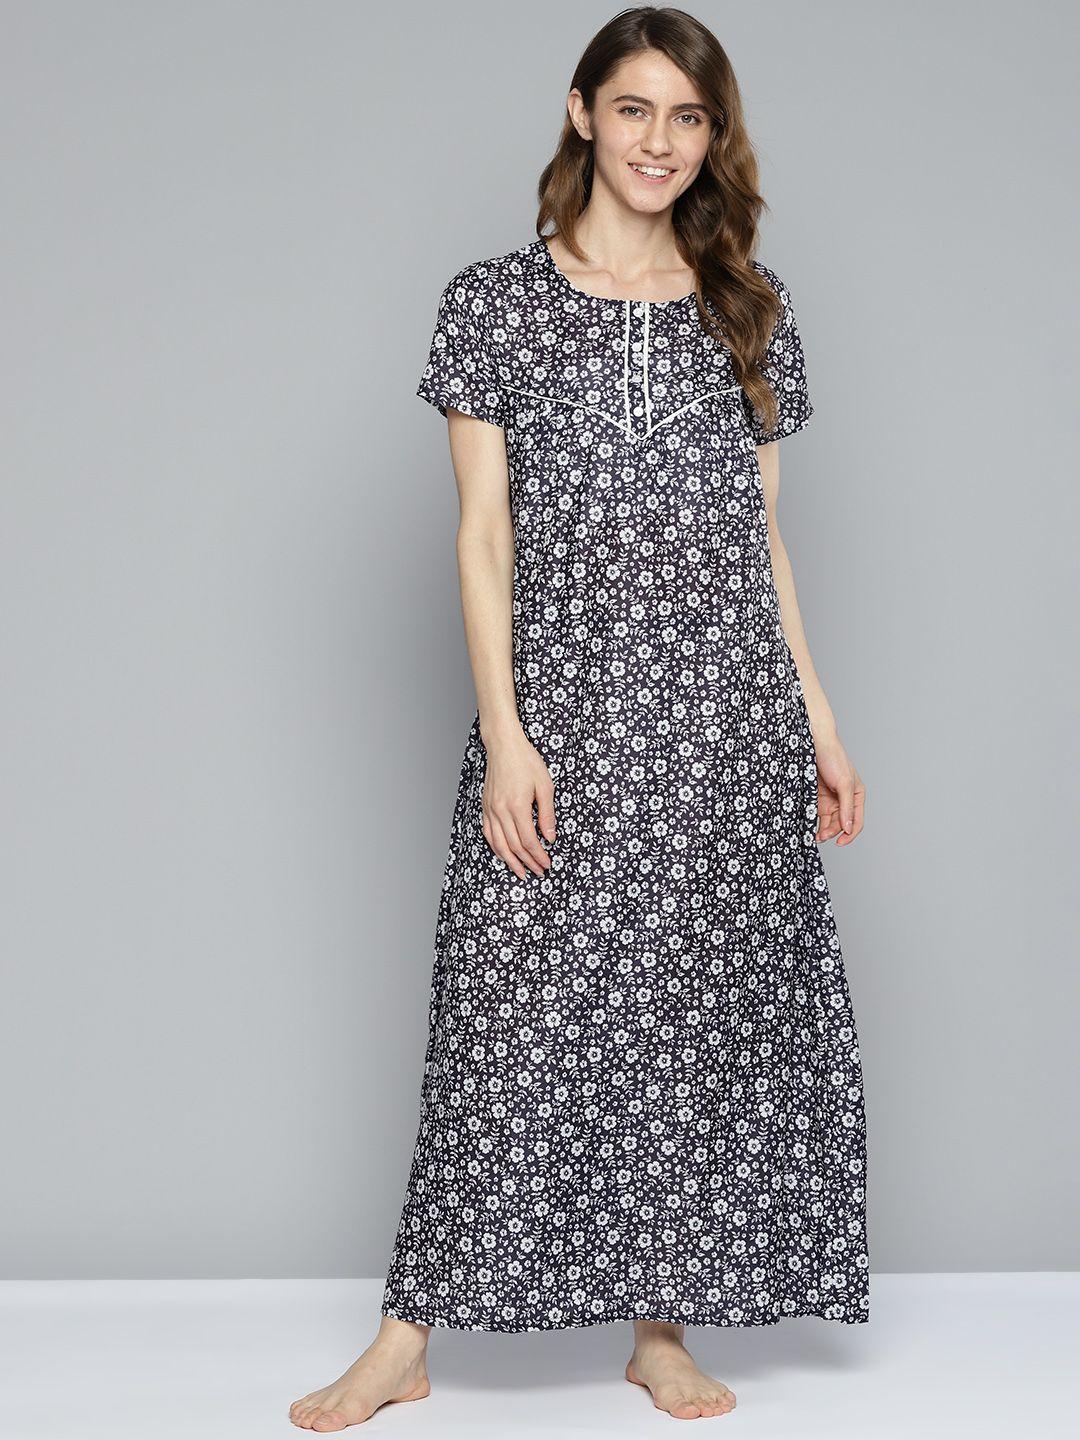 here&now black & white floral printed maxi nightdress